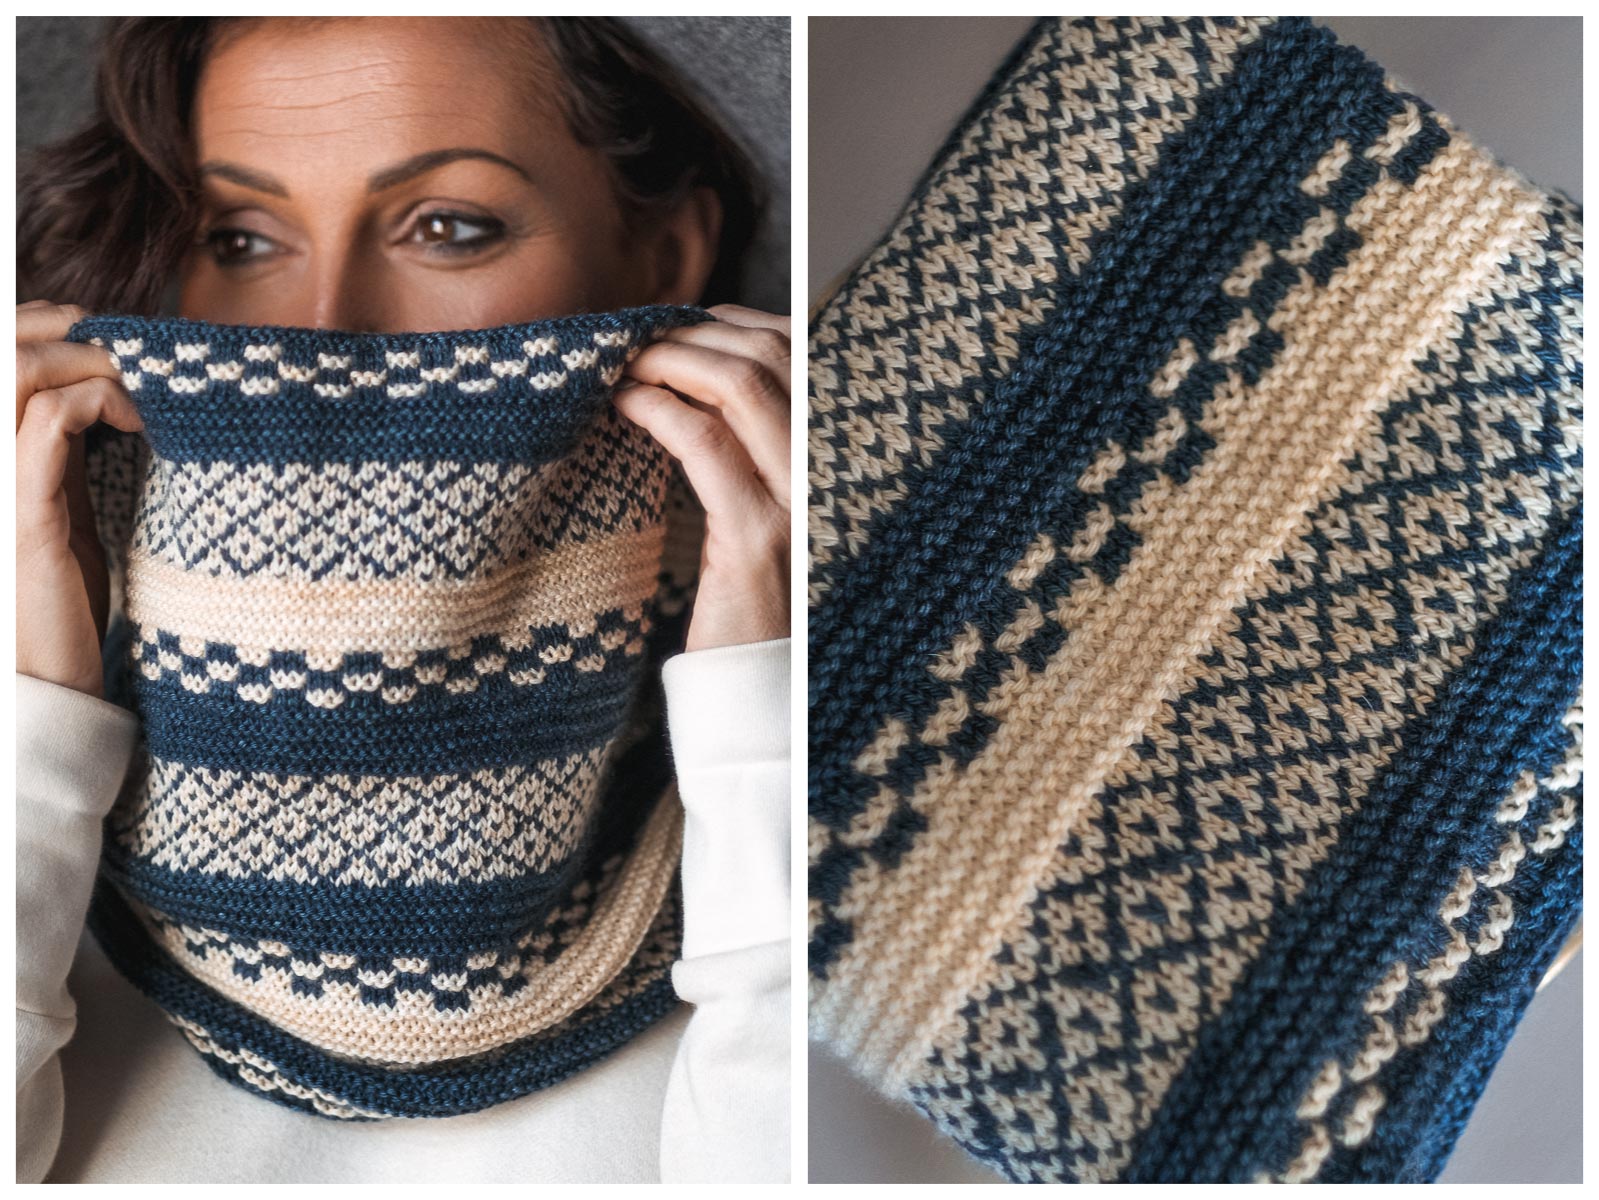 Knit This Two-Color, Fair Isle Cowl Today - Jelm! - Expression Fiber Arts